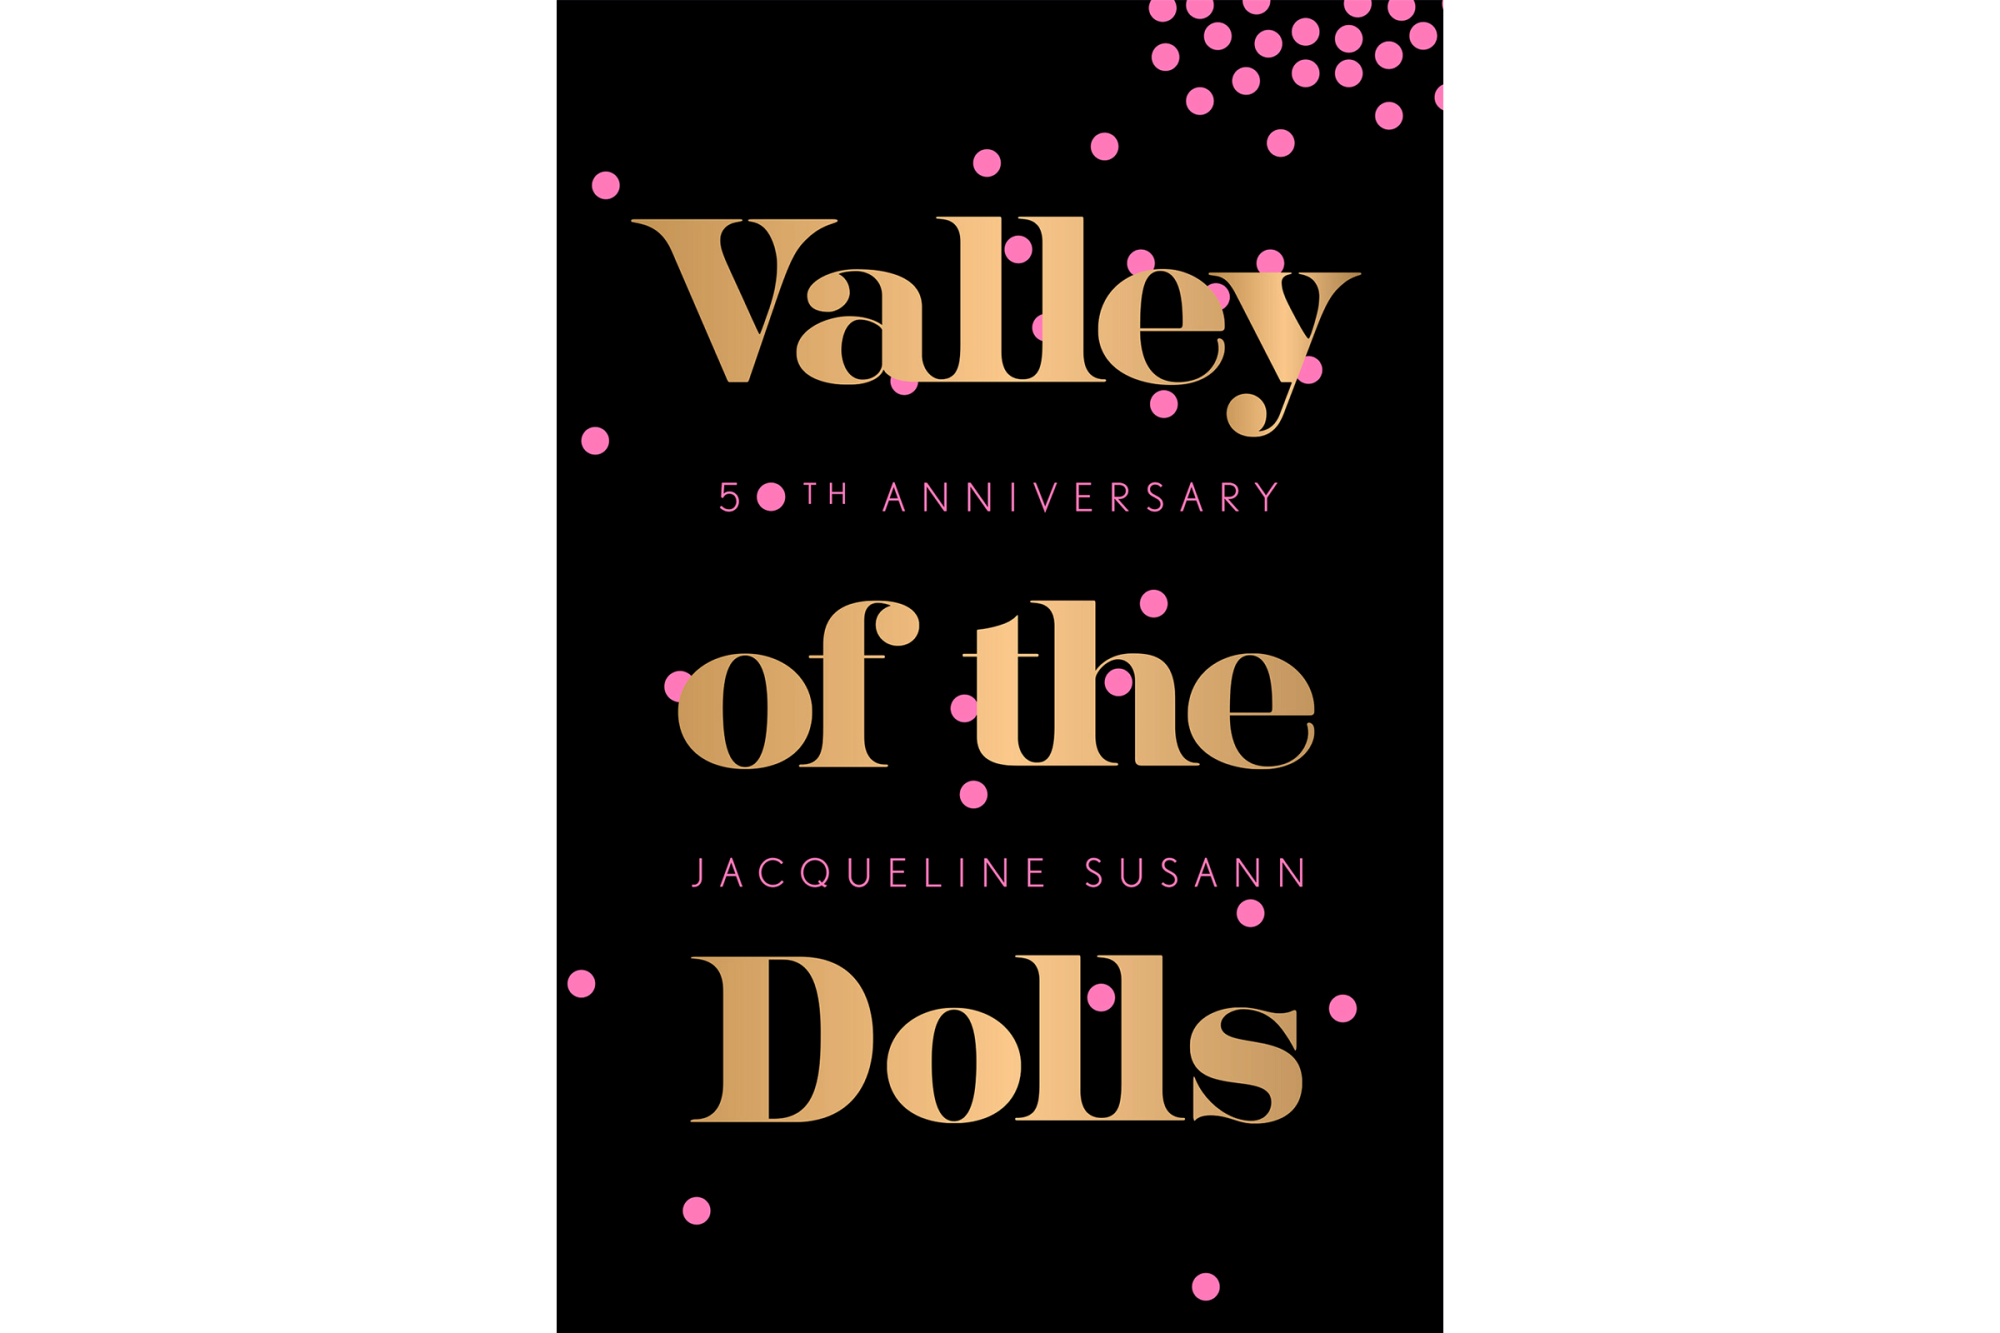 "Valley of the Dolls" by Jacqueline Susann